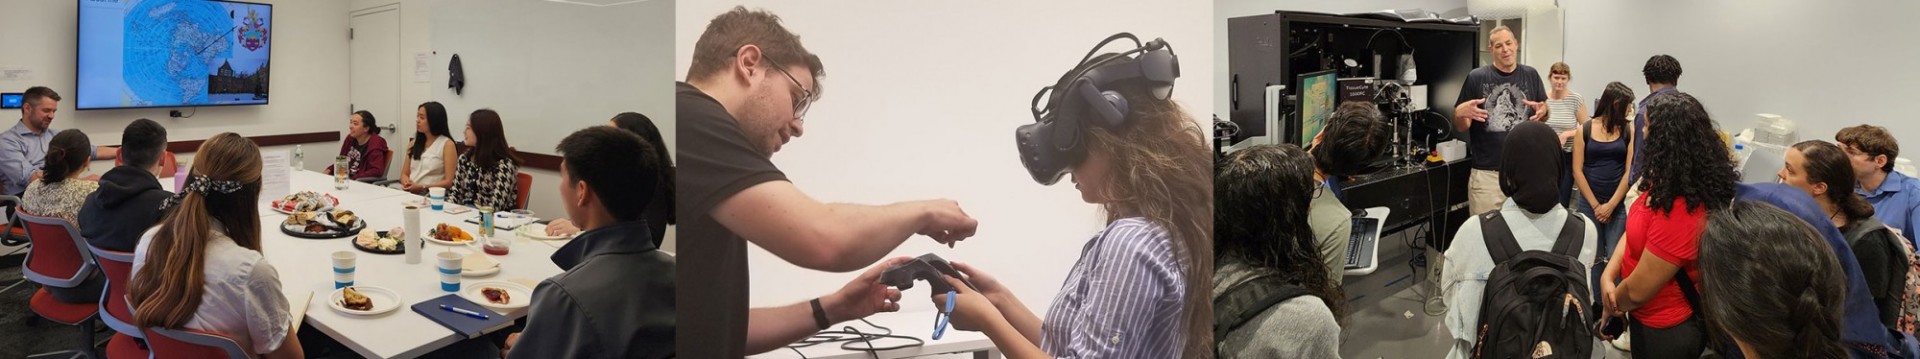 From left to right: a group of students and faculty discussing around a conference room table, two people using VR, a group of people looking at a microscope